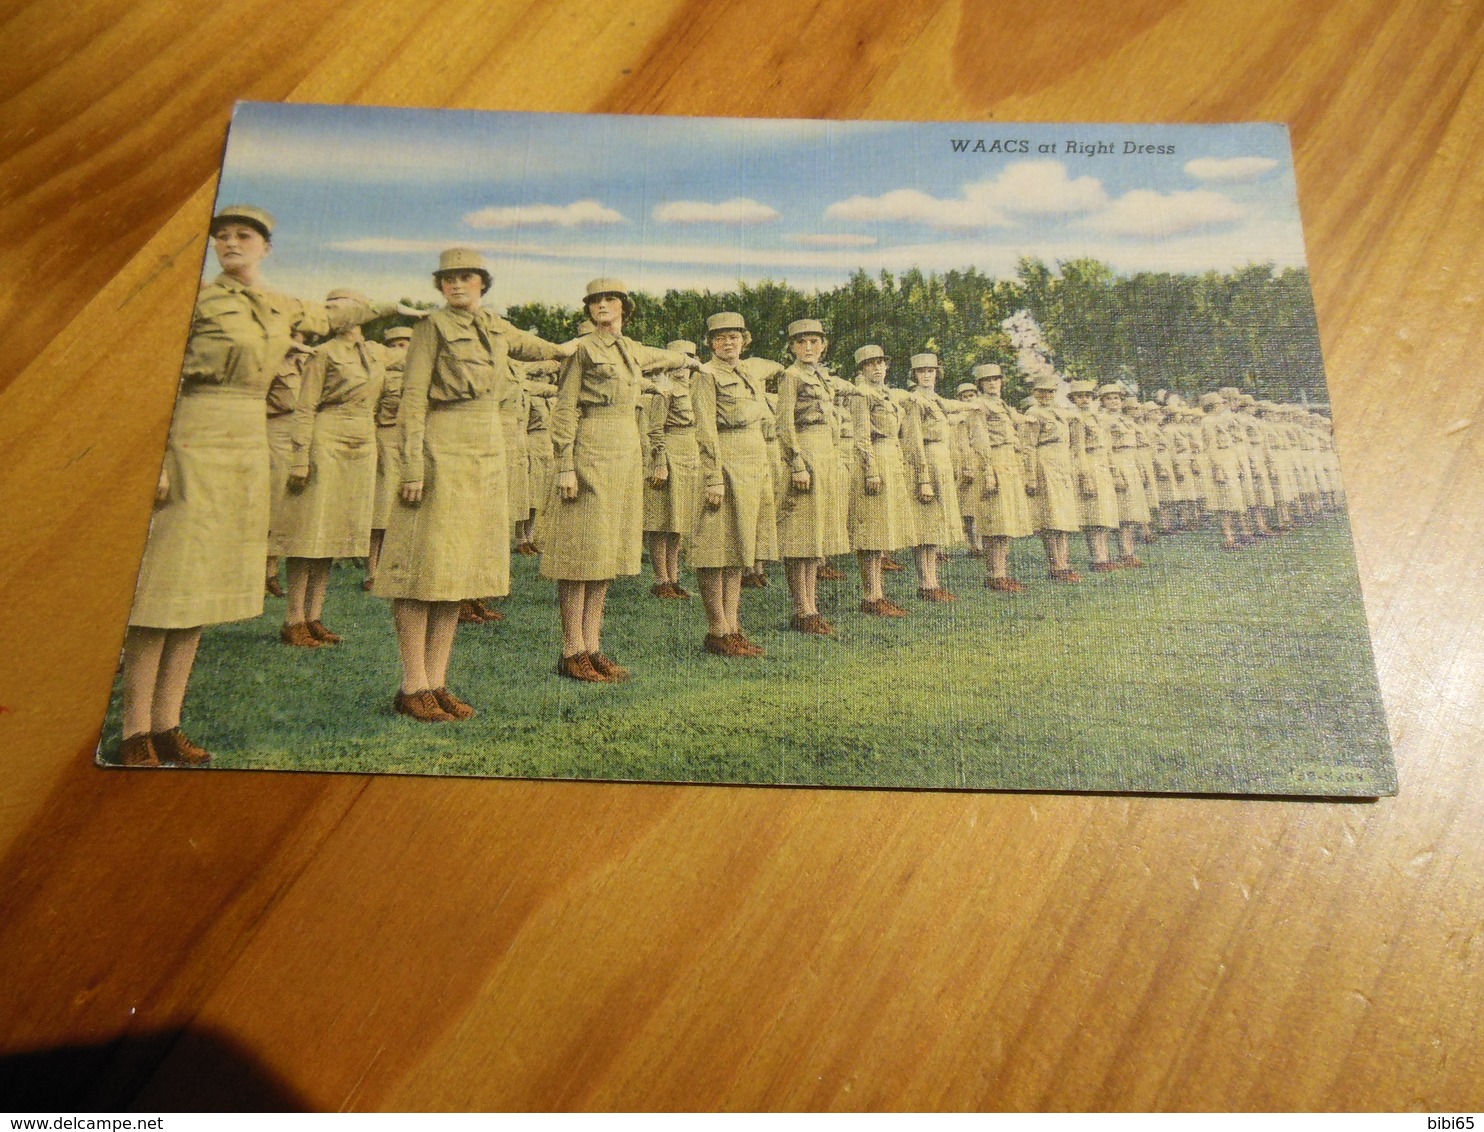 WOMEN'S ARMY CORPS AT RIGHT DRESS - Des Moines